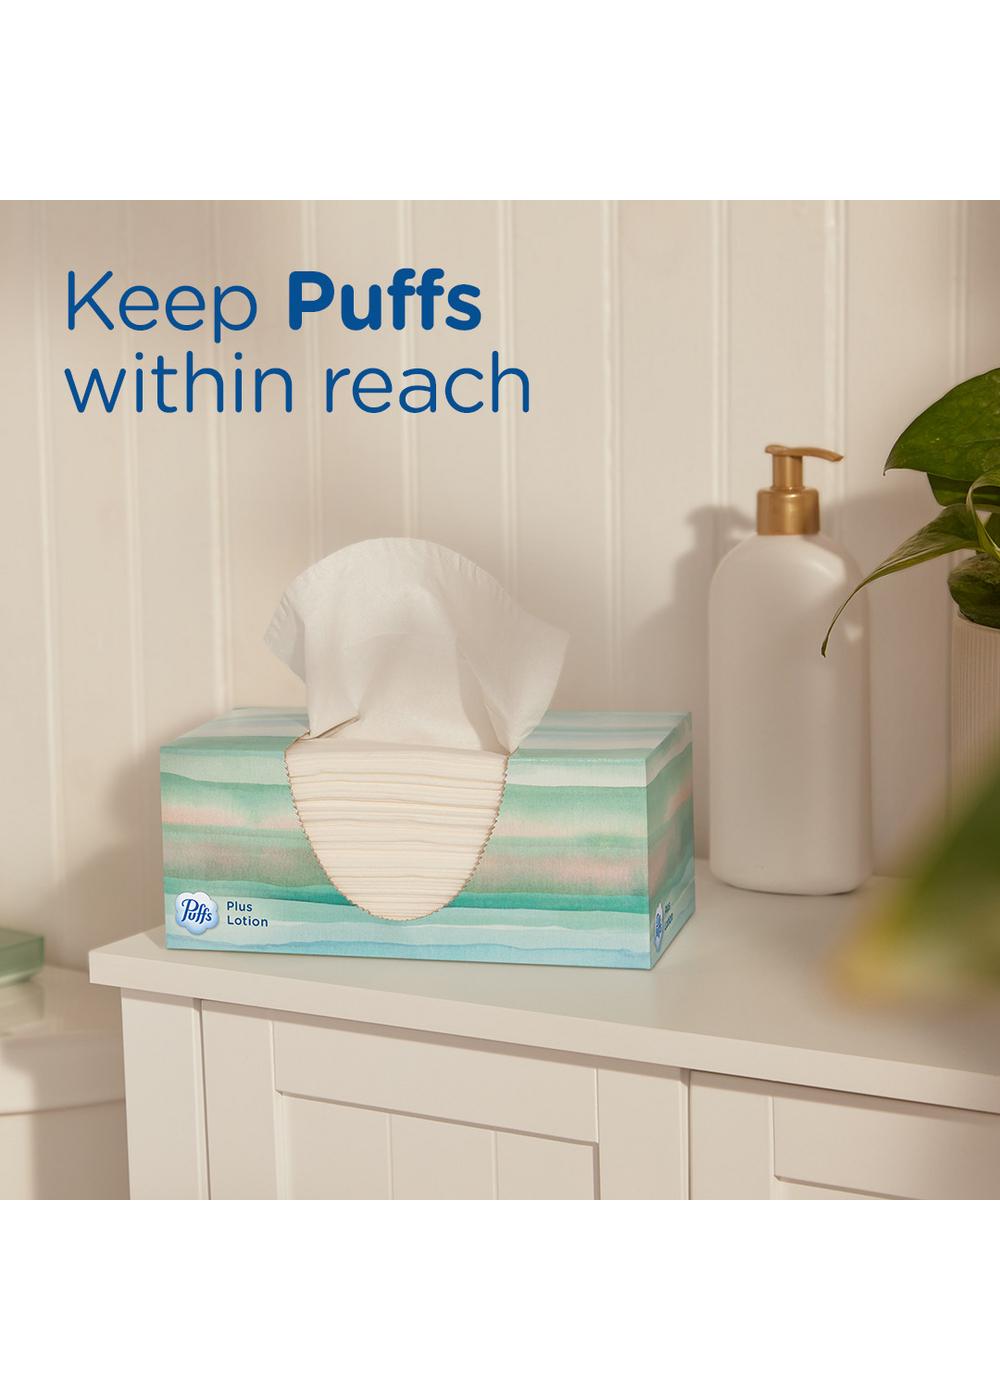 Puffs Plus Lotion Facial Tissues 4 pk; image 2 of 3